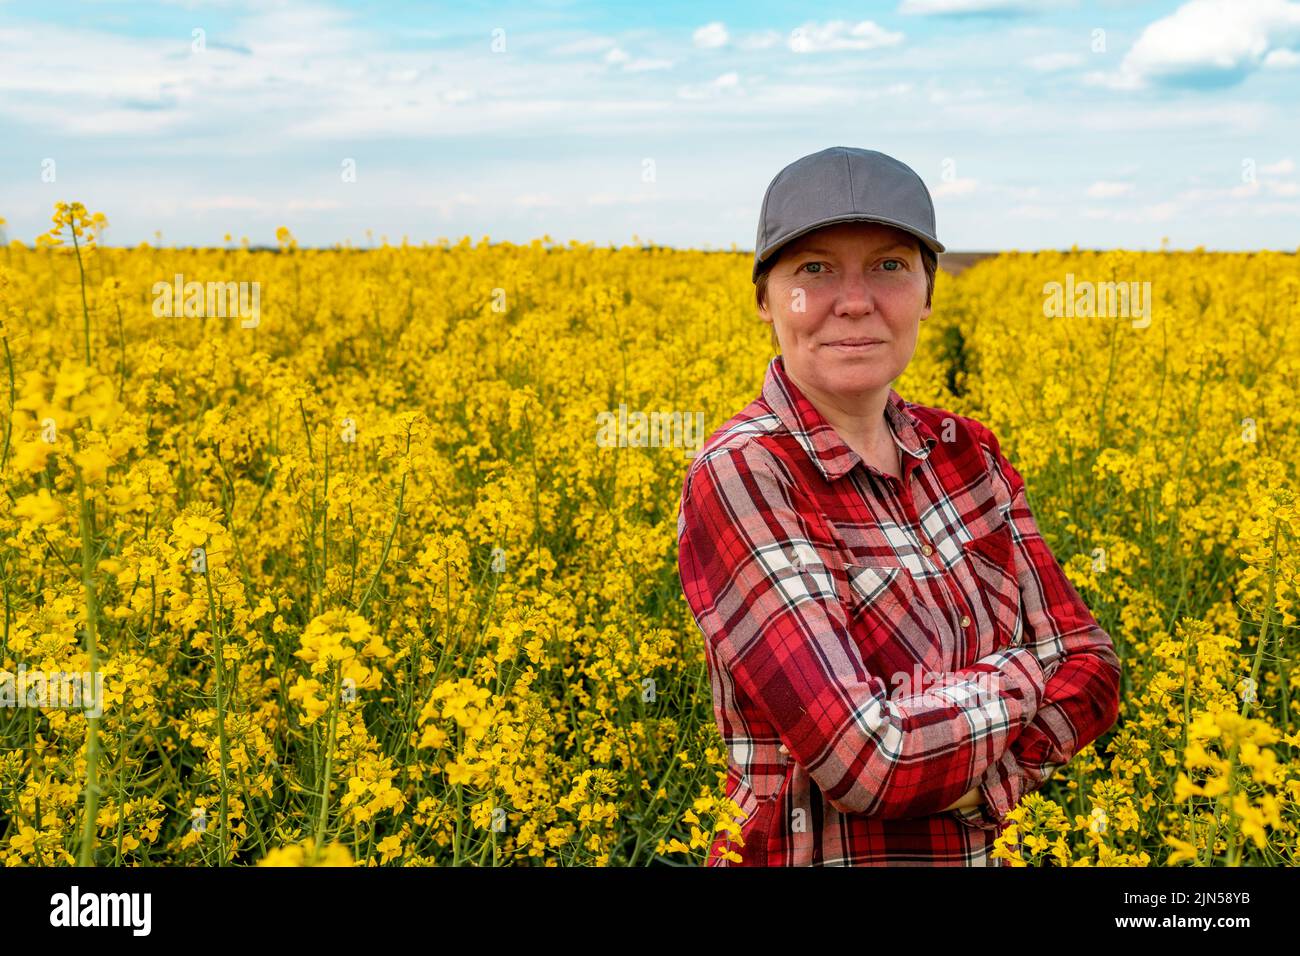 Confident and self-assured farm worker wearing red plaid shirt and trucker's hat standing in cultivated rapeseed field in bloom and looking over crops Stock Photo